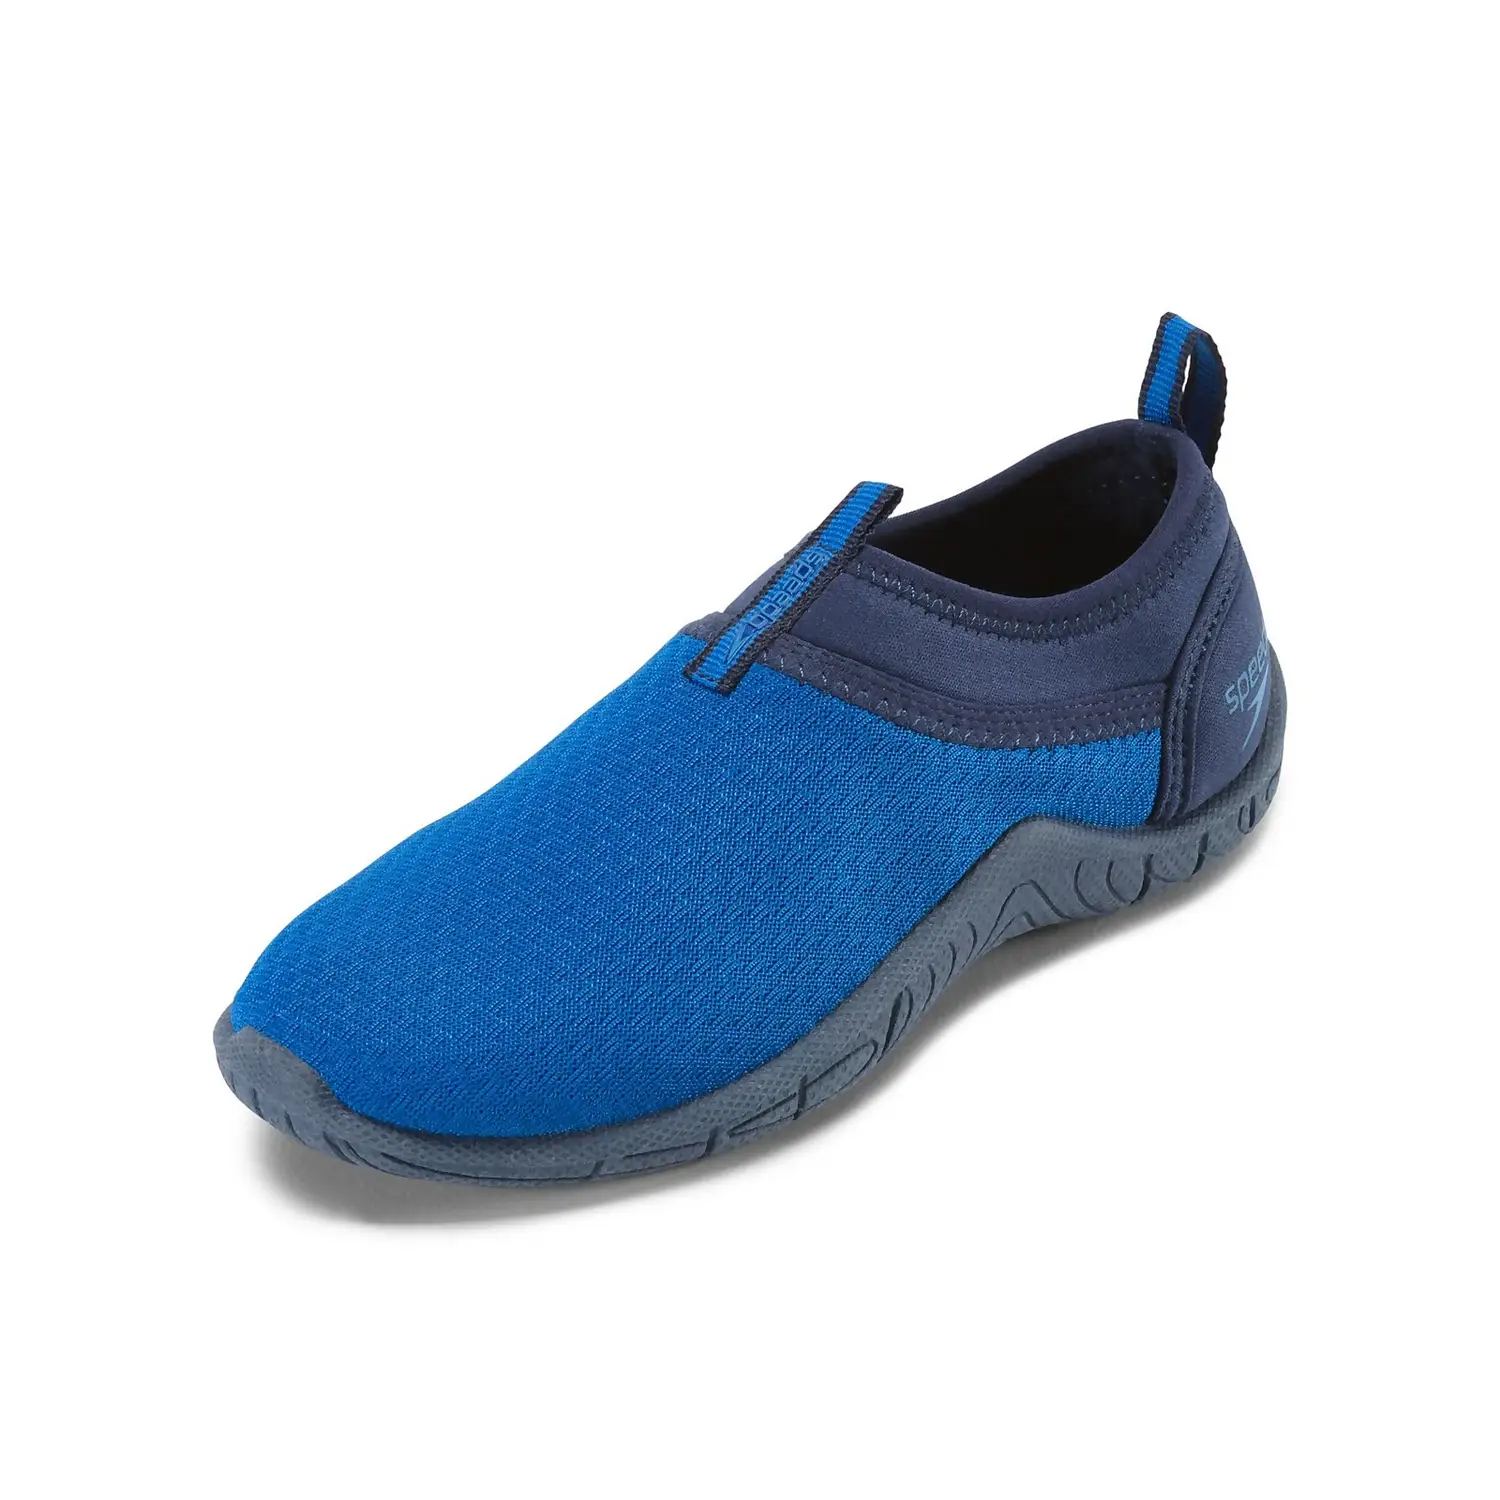 13 Best Water Shoes For Kids In 2023, As Per Fashion Stylists